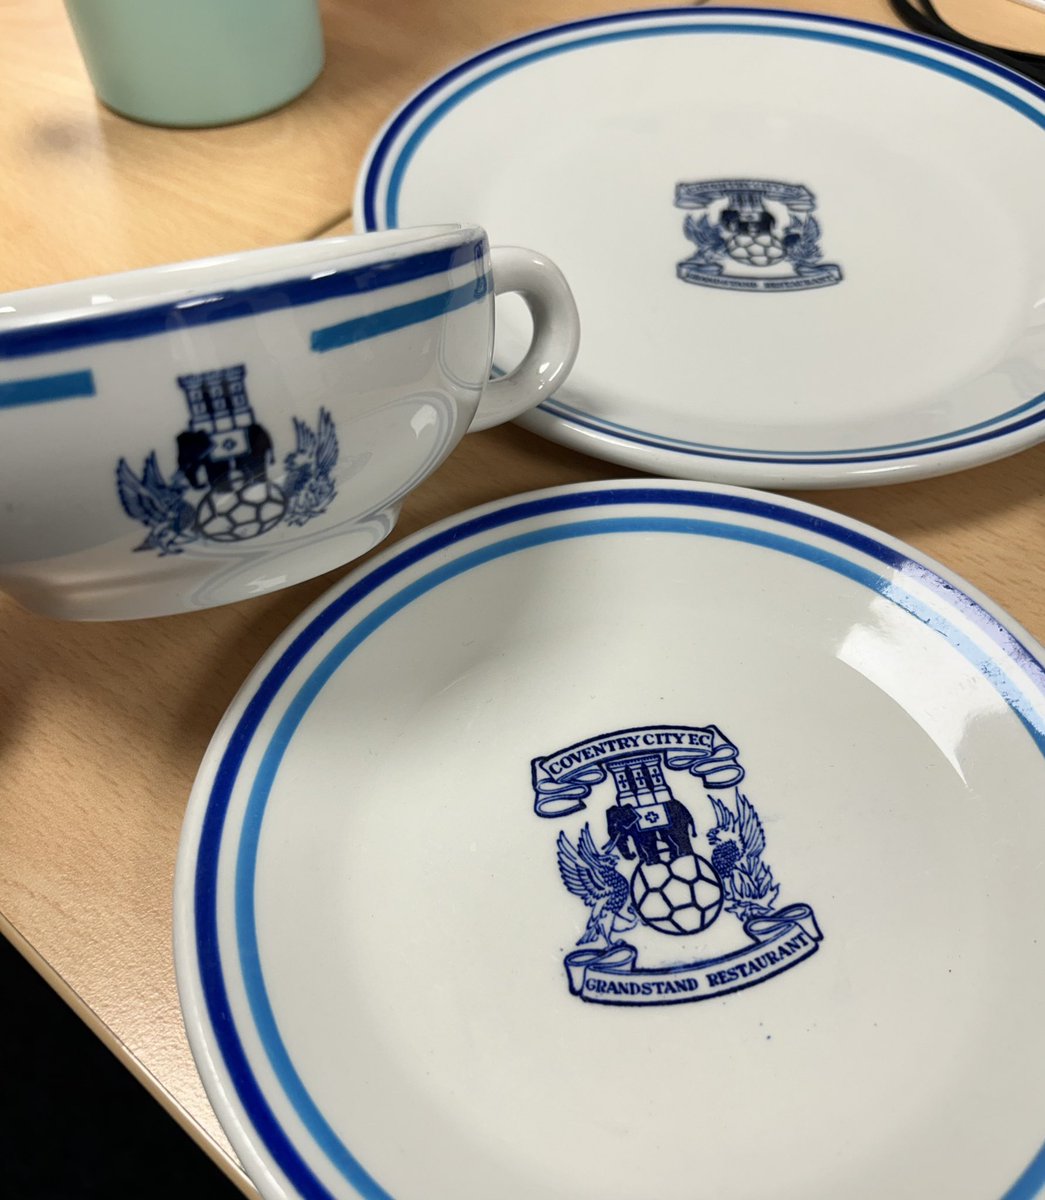 My lovely colleague has gifted me this set this morning…. Relics from Highfield Road hospitality #PUSB